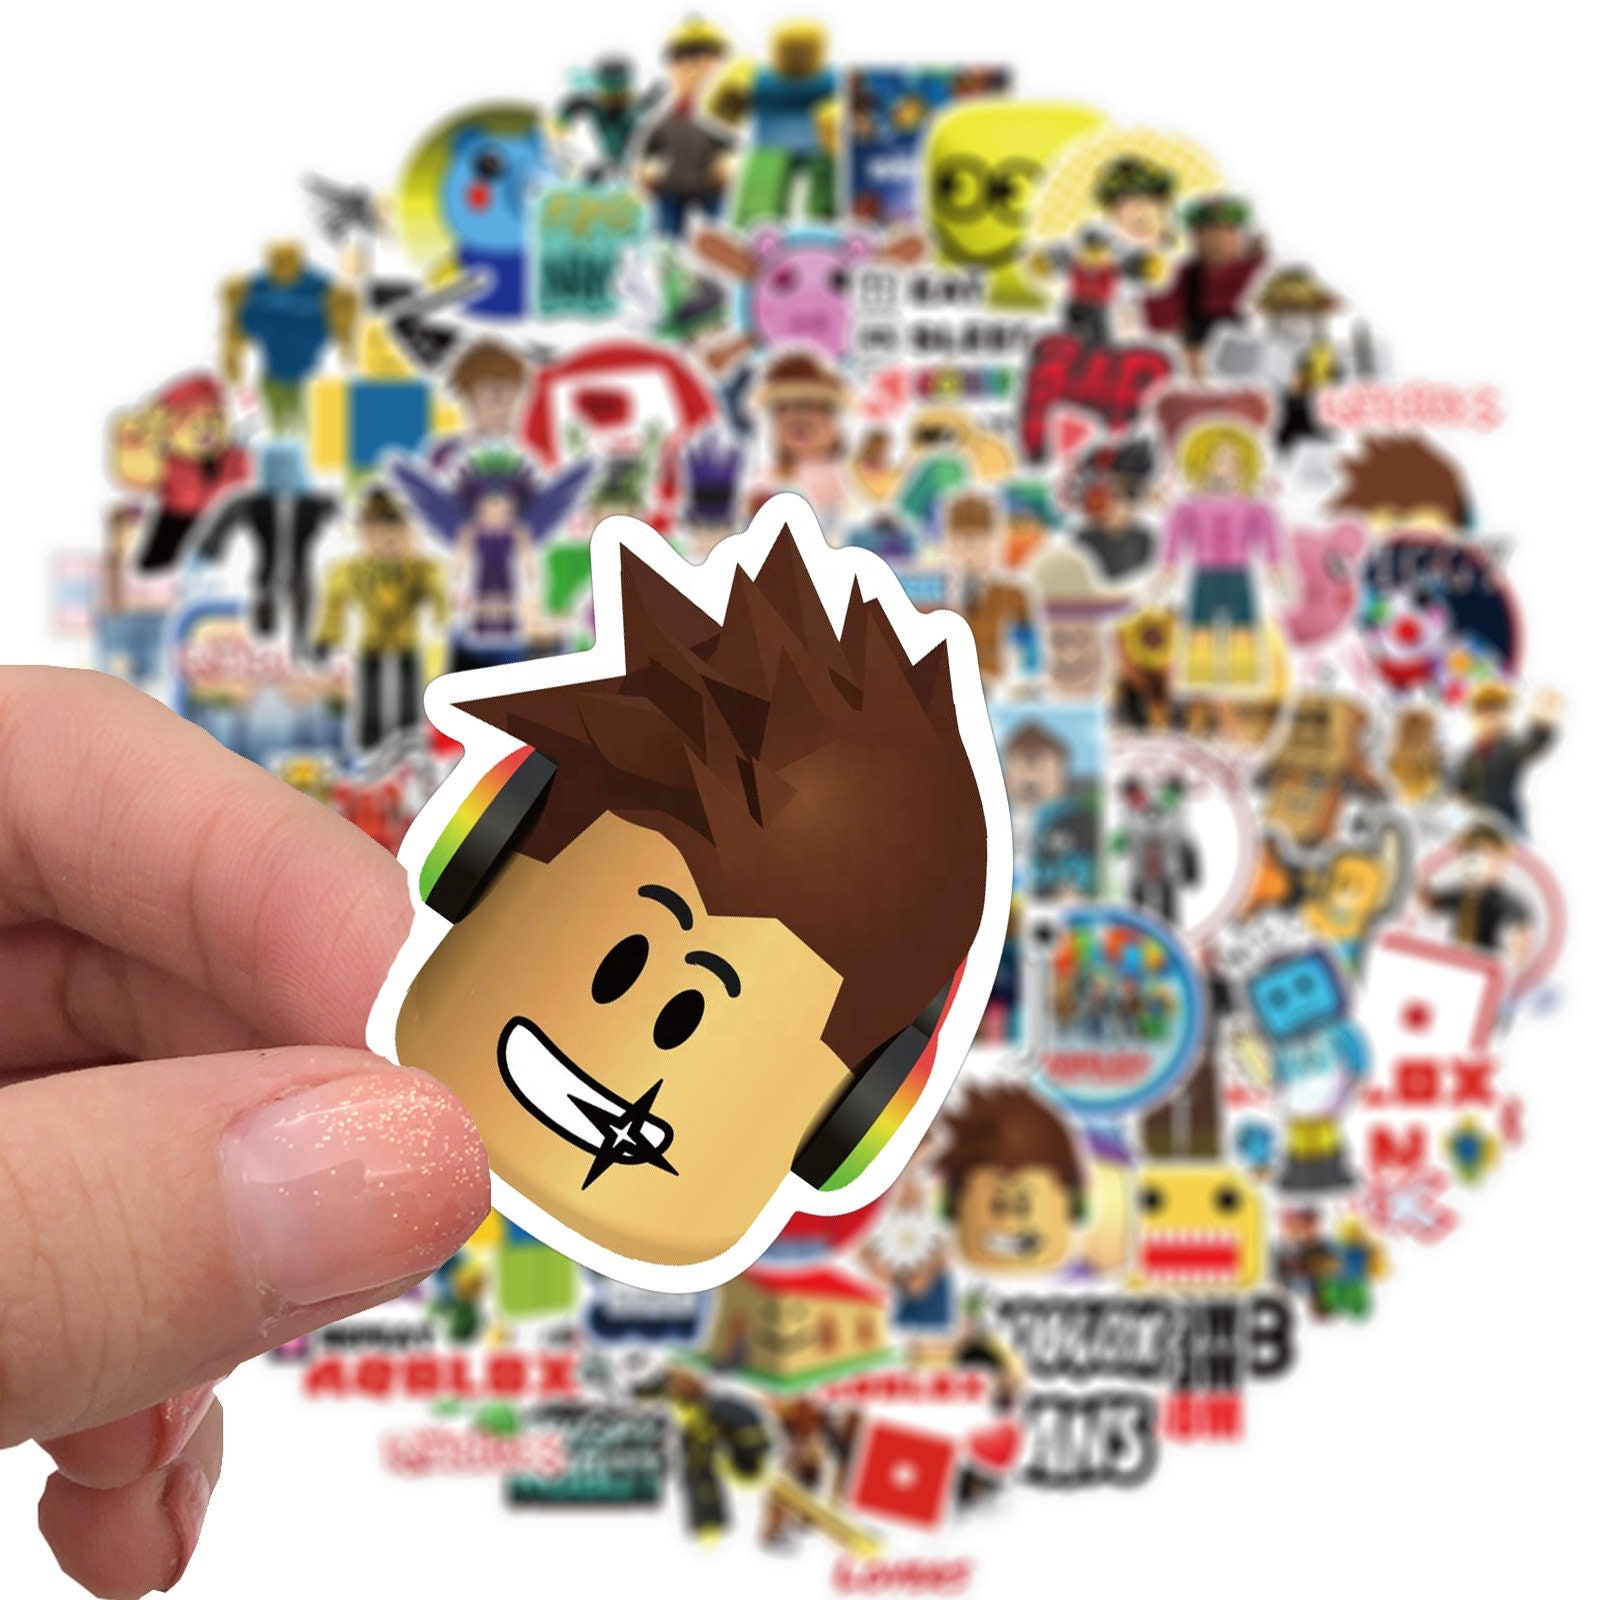 Robloxmemes Stickers for Sale